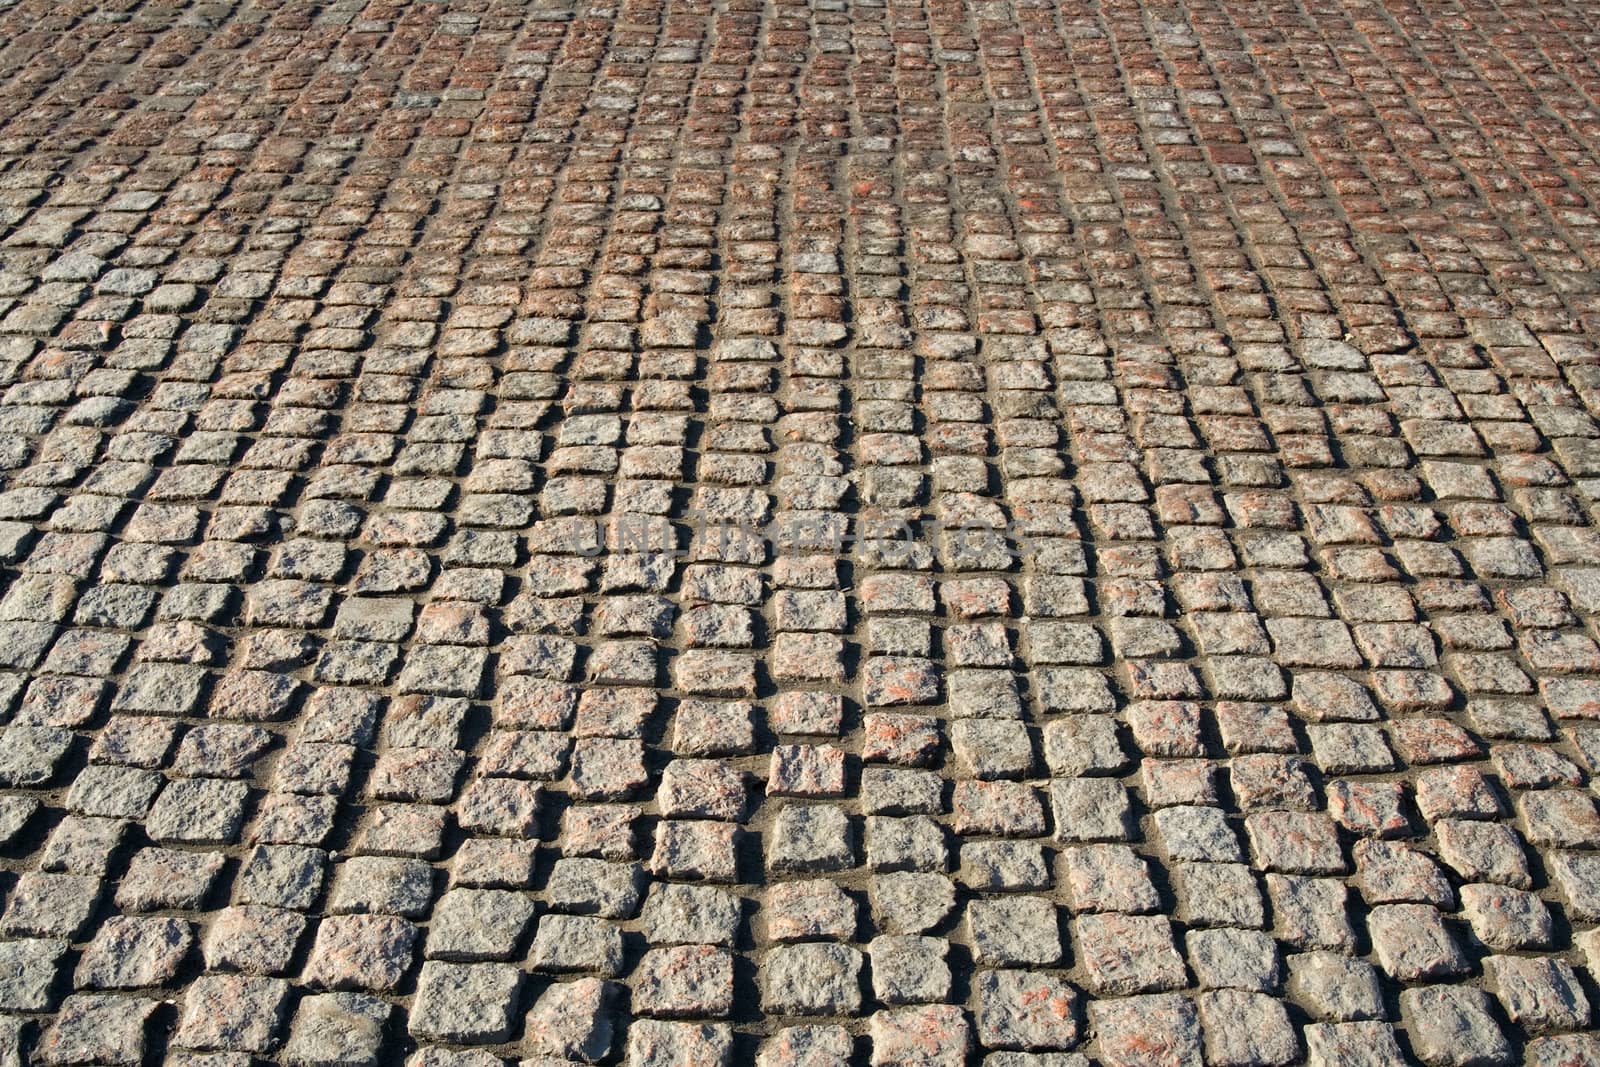 Texture of a Stone Roadway